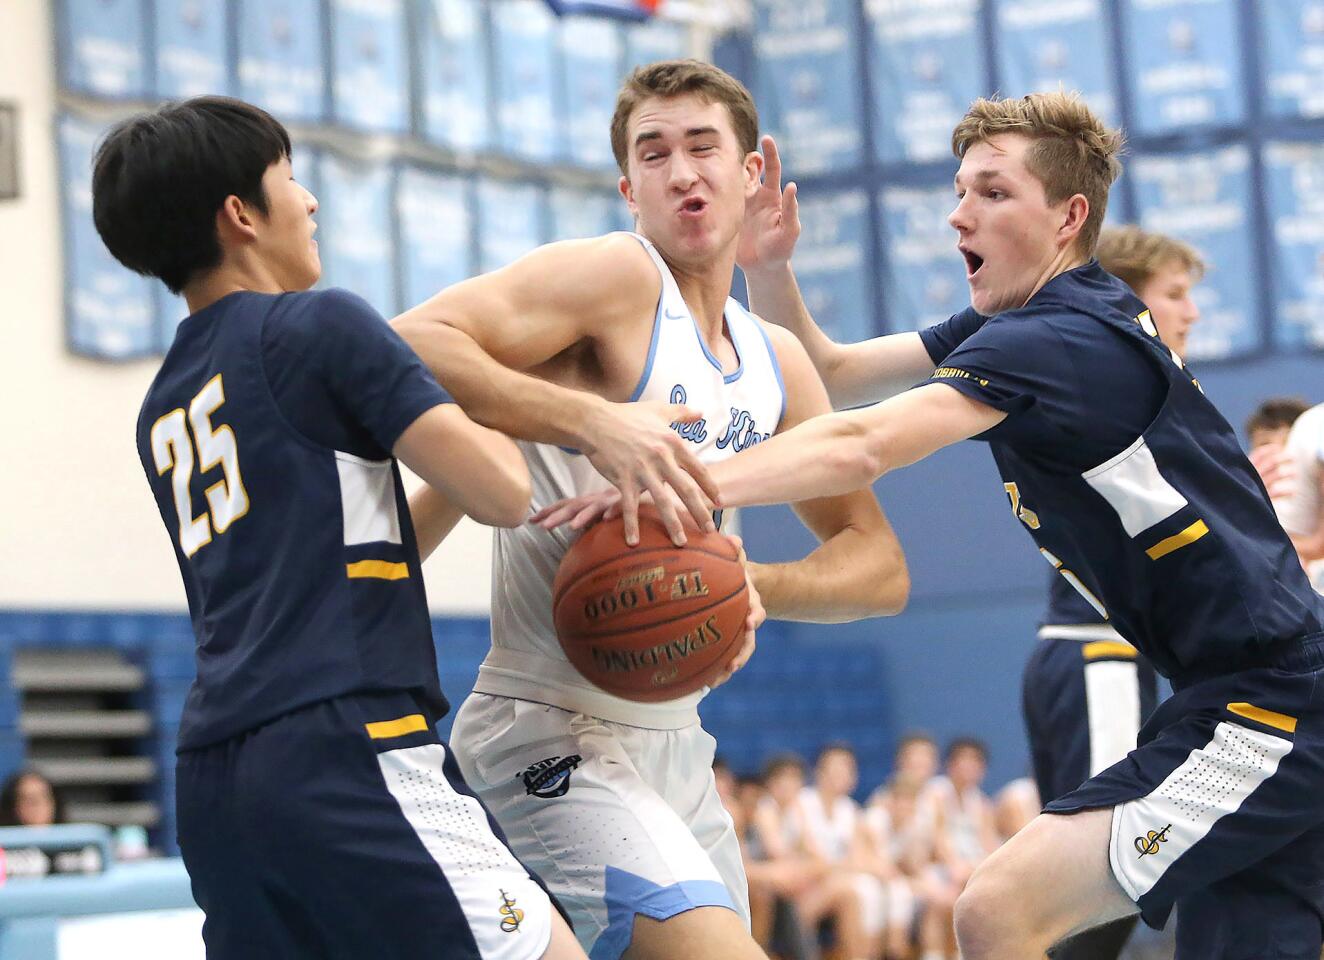 Corona del Mar's John Humphreys is fouled as he turns to shoot in the paint during the CdM Beach Bash tournament opener against Crean Lutheran on Monday.